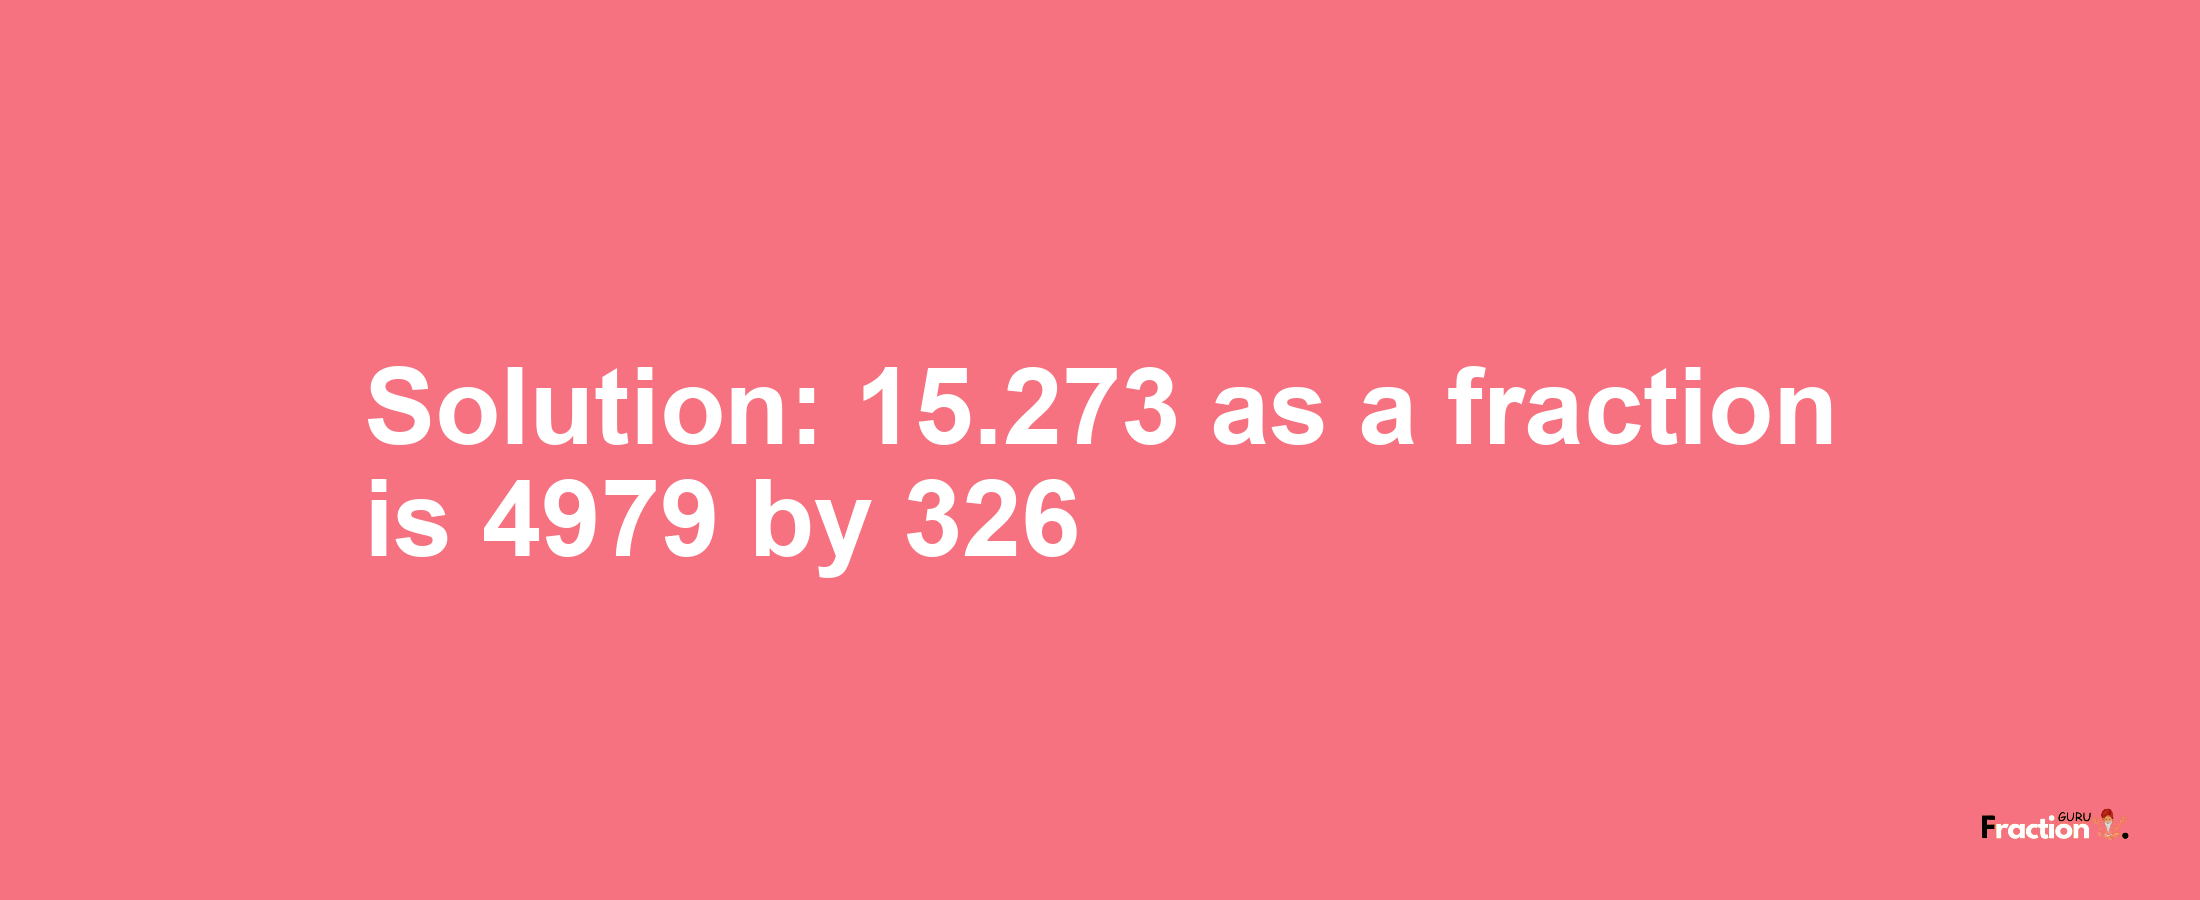 Solution:15.273 as a fraction is 4979/326